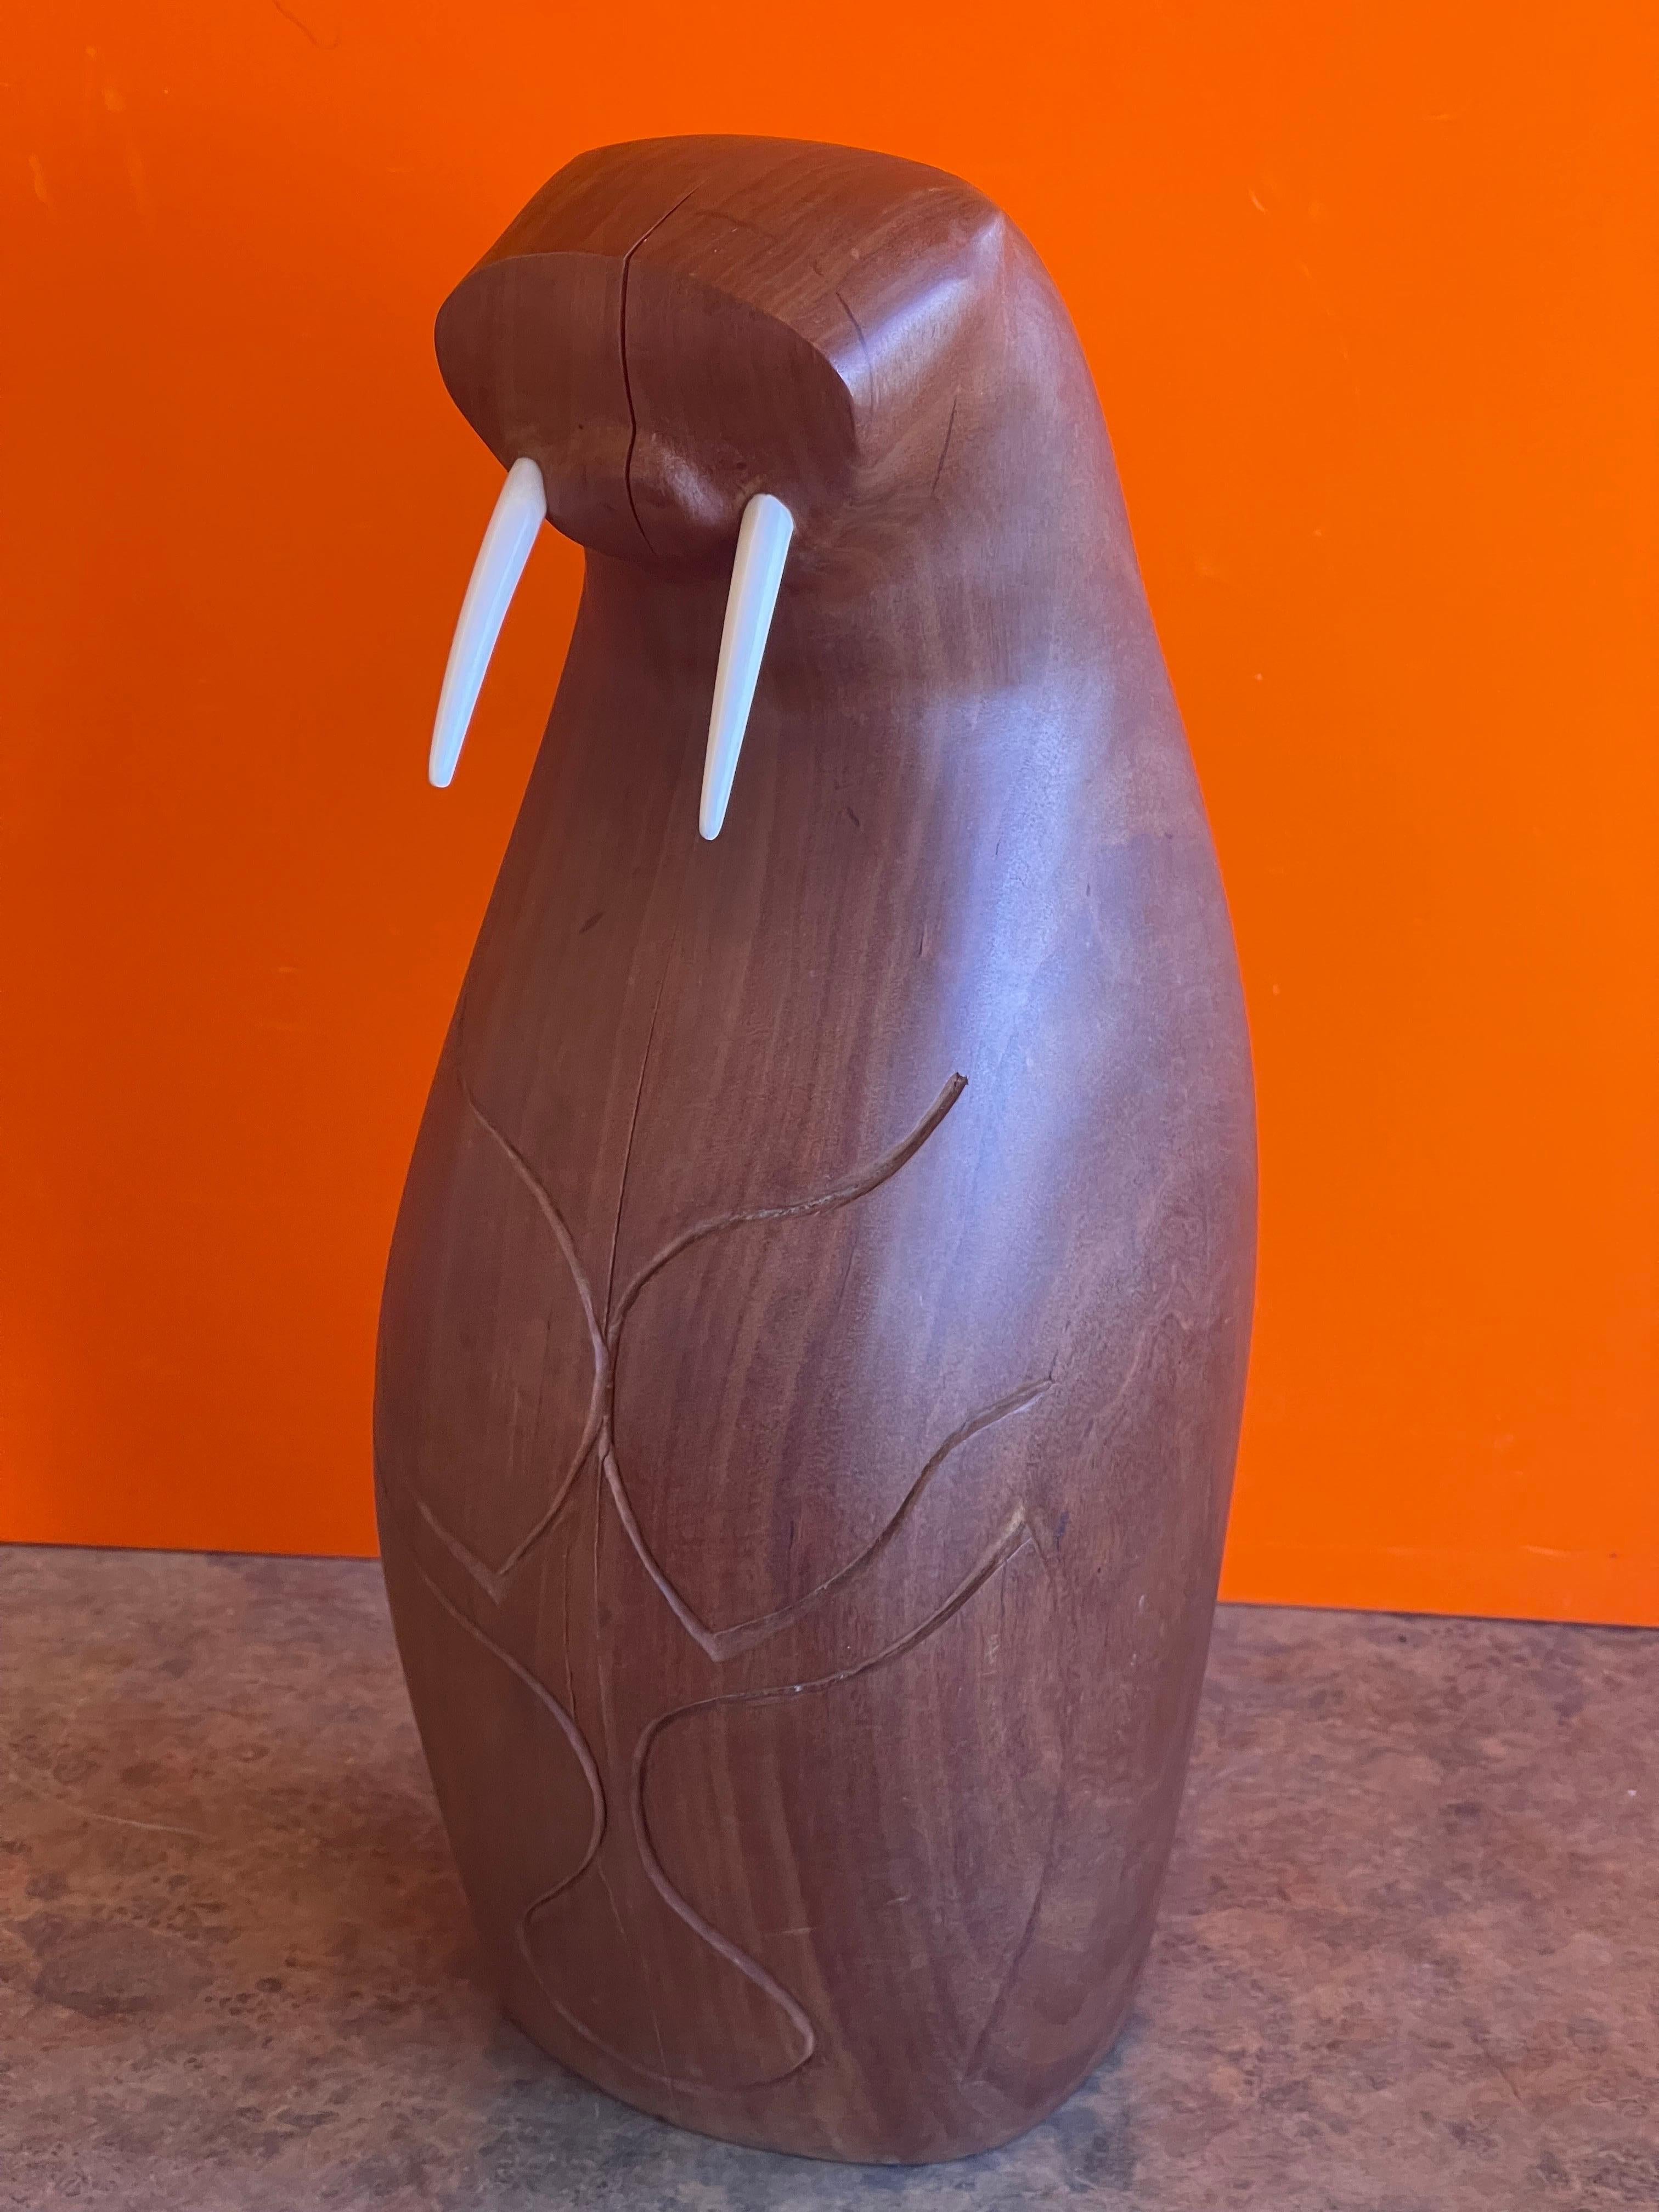 A very cool Mid-Century Modern walrus carving / sculpture in teak by Inuit artist Isaac Koyuk, circa 1968. A super cool and rare piece with a teak body and bone tusks has a few stress fractures on the face and body (please see pictures). The piece